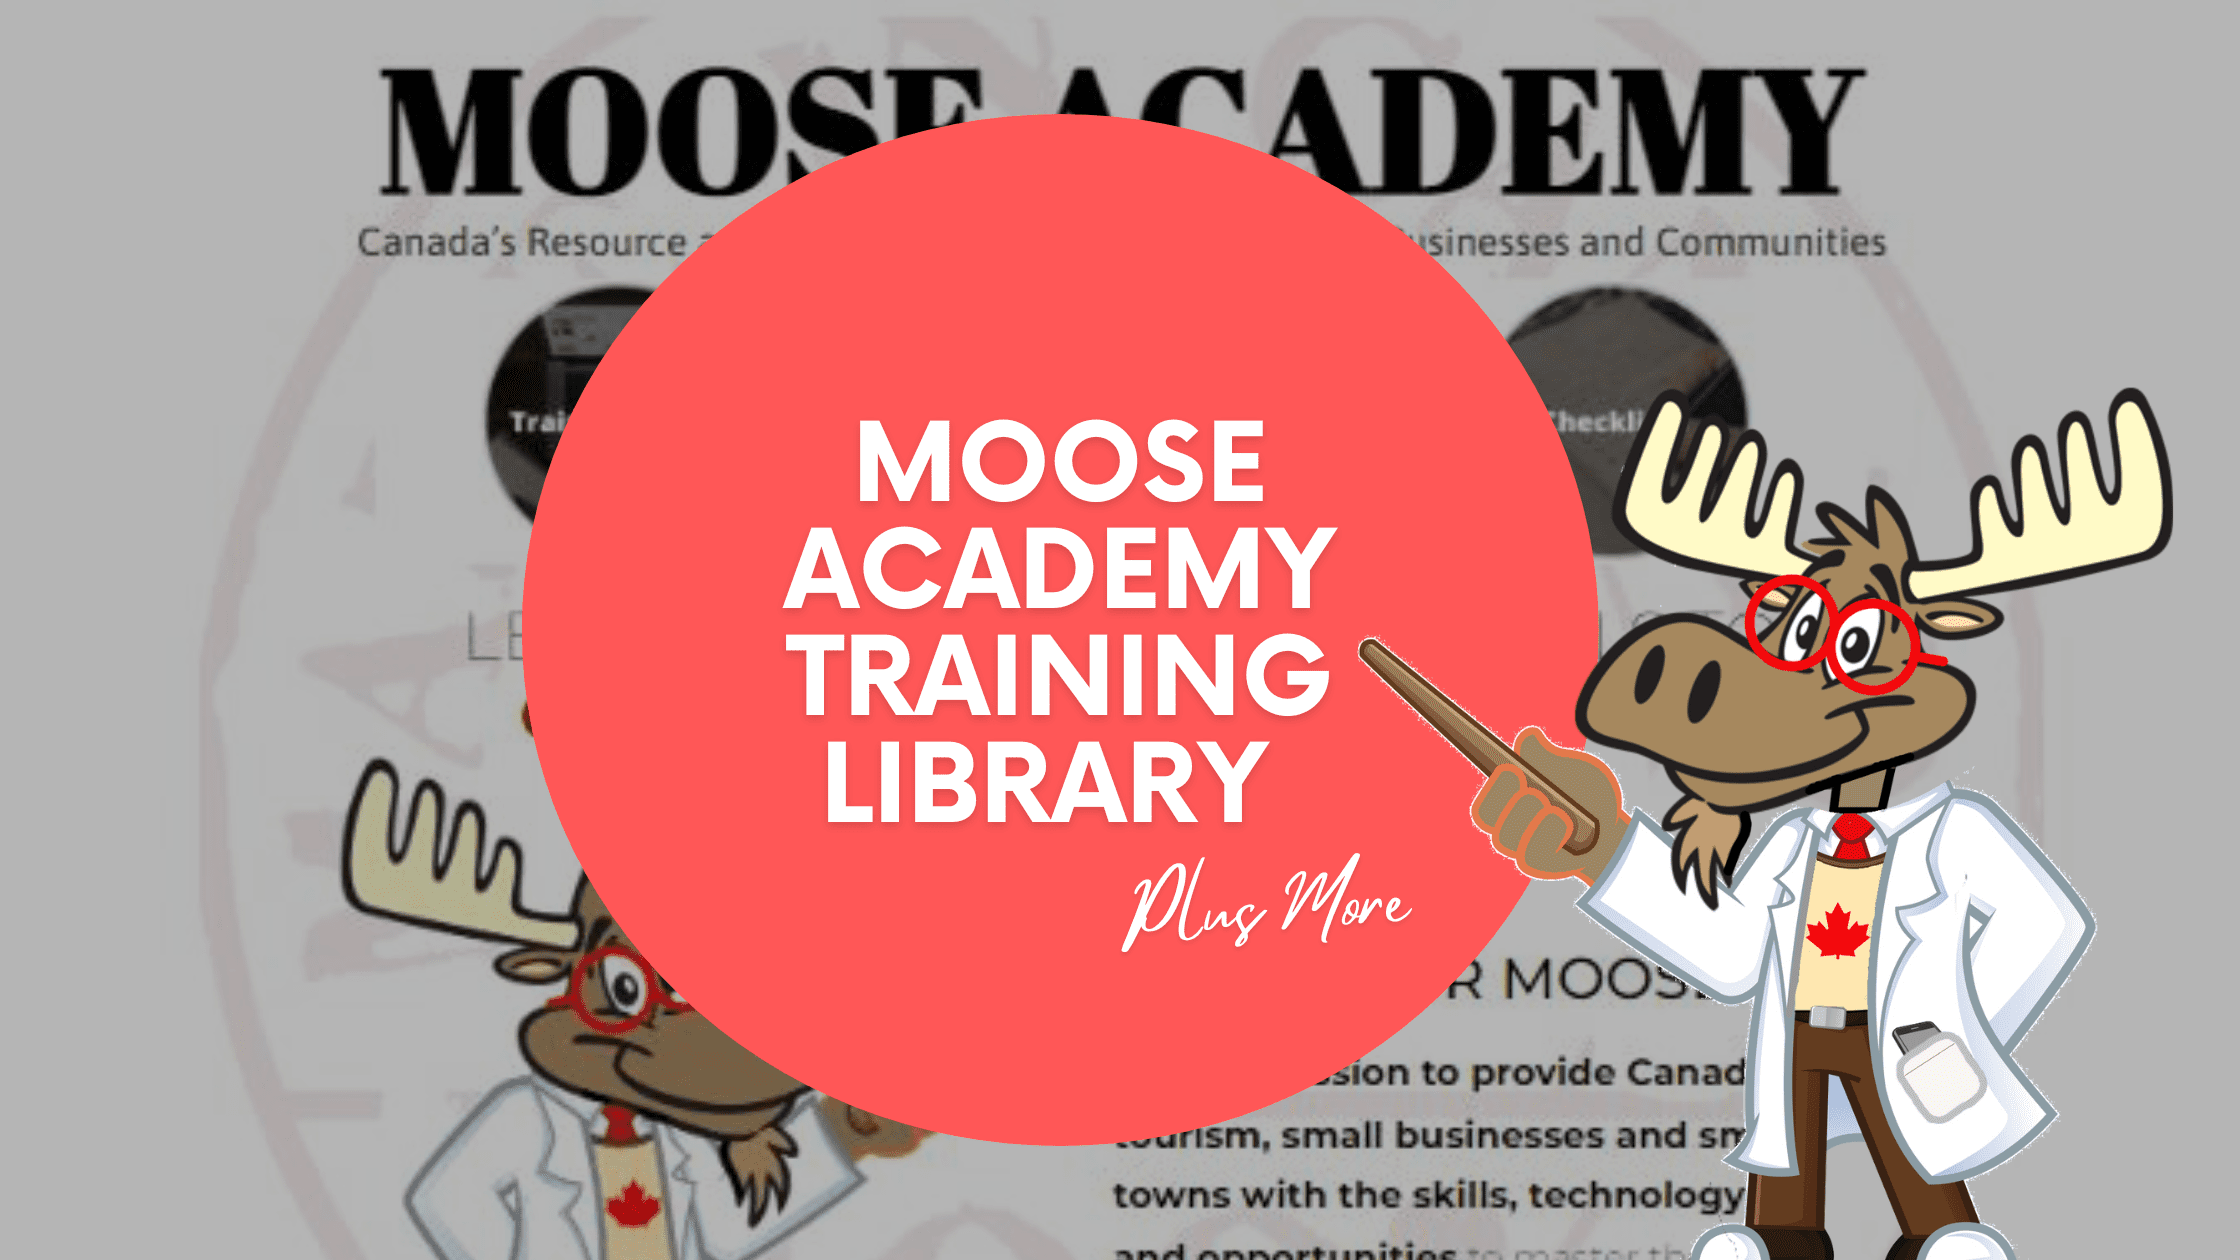 The Moose Academy is an online training library for small and mid size communities in Canada